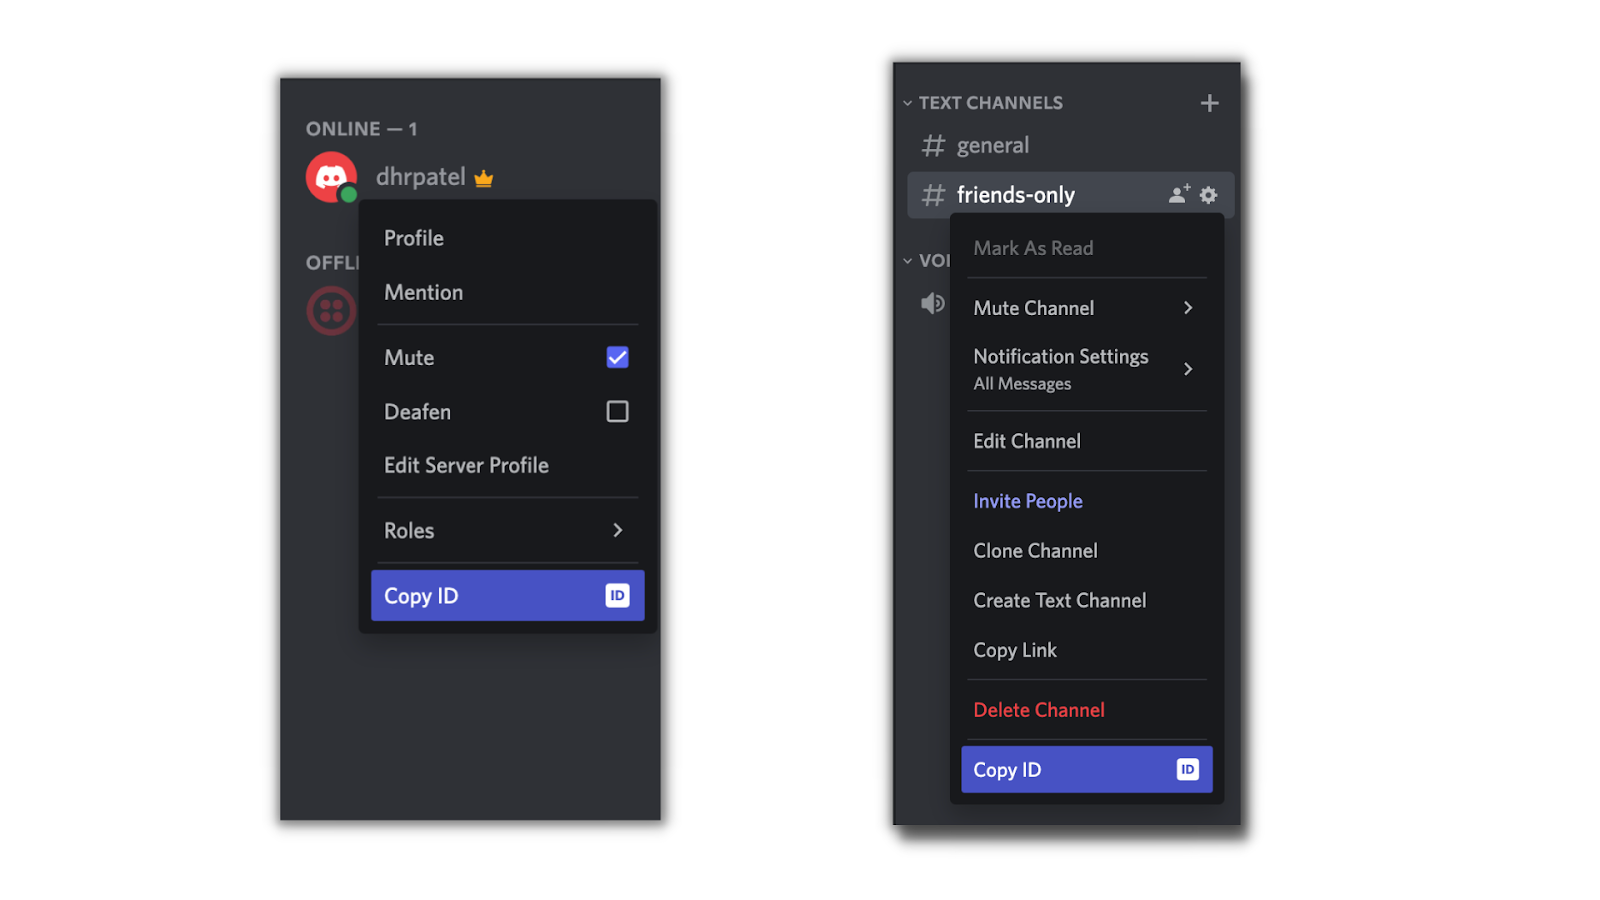 Left image shows Copy ID item selected in right click menu on user. Right image shows copy id selected in the right click menu of the friends-only channel